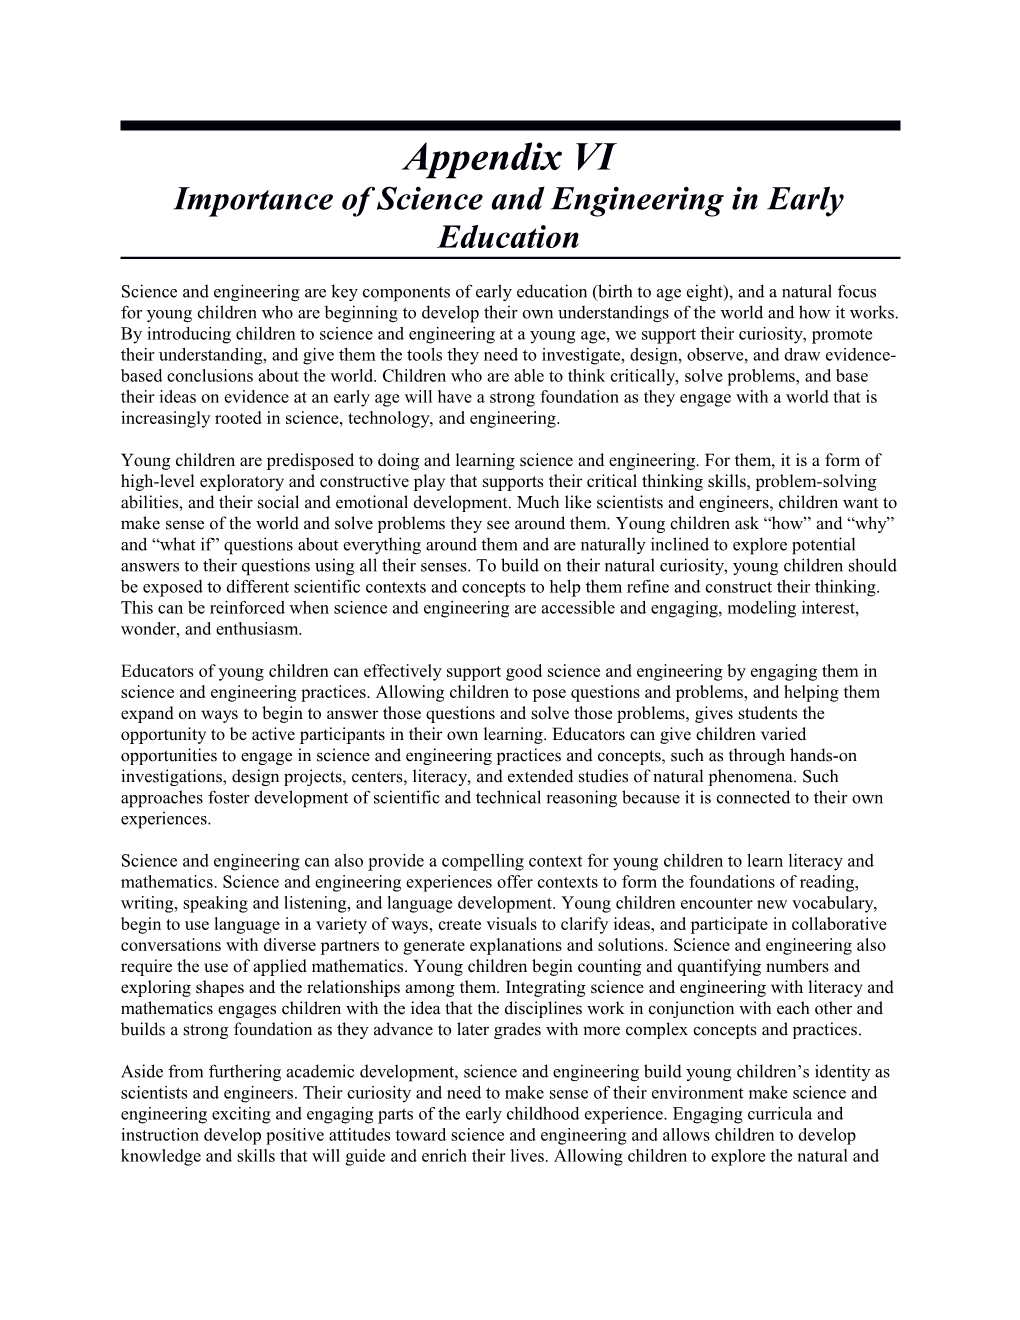 Appendix VI: Importance of Science and Engineering in Early Education